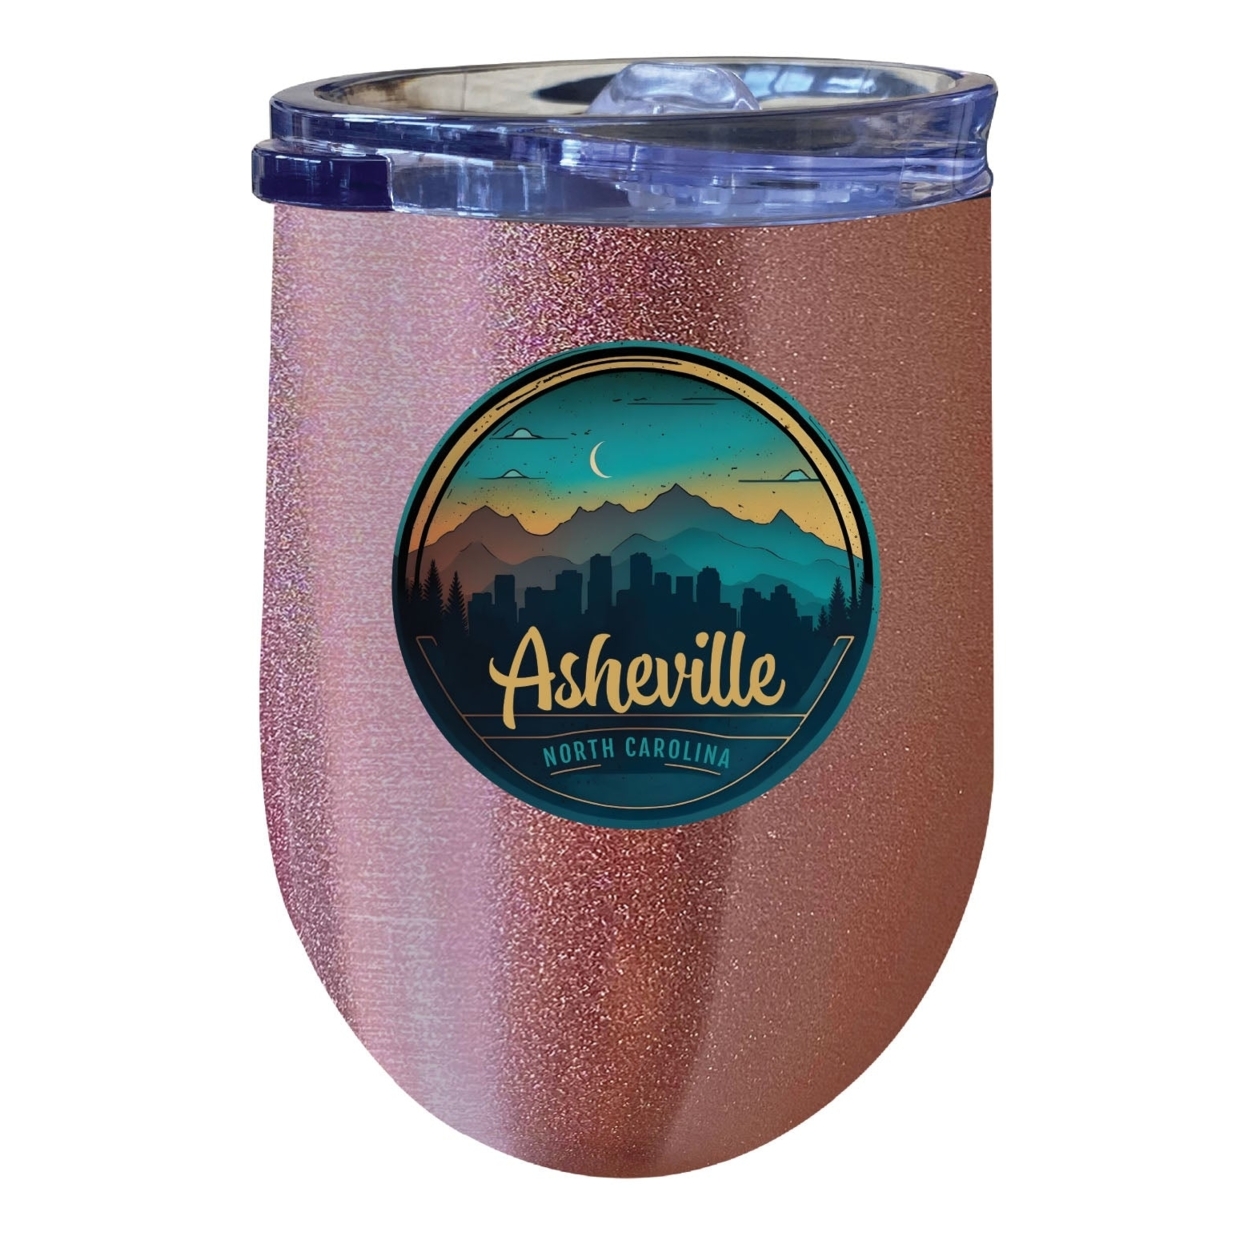 Asheville North Carolina Souvenir 12 Oz Insulated Wine Stainless Steel Tumbler - Rose Gold